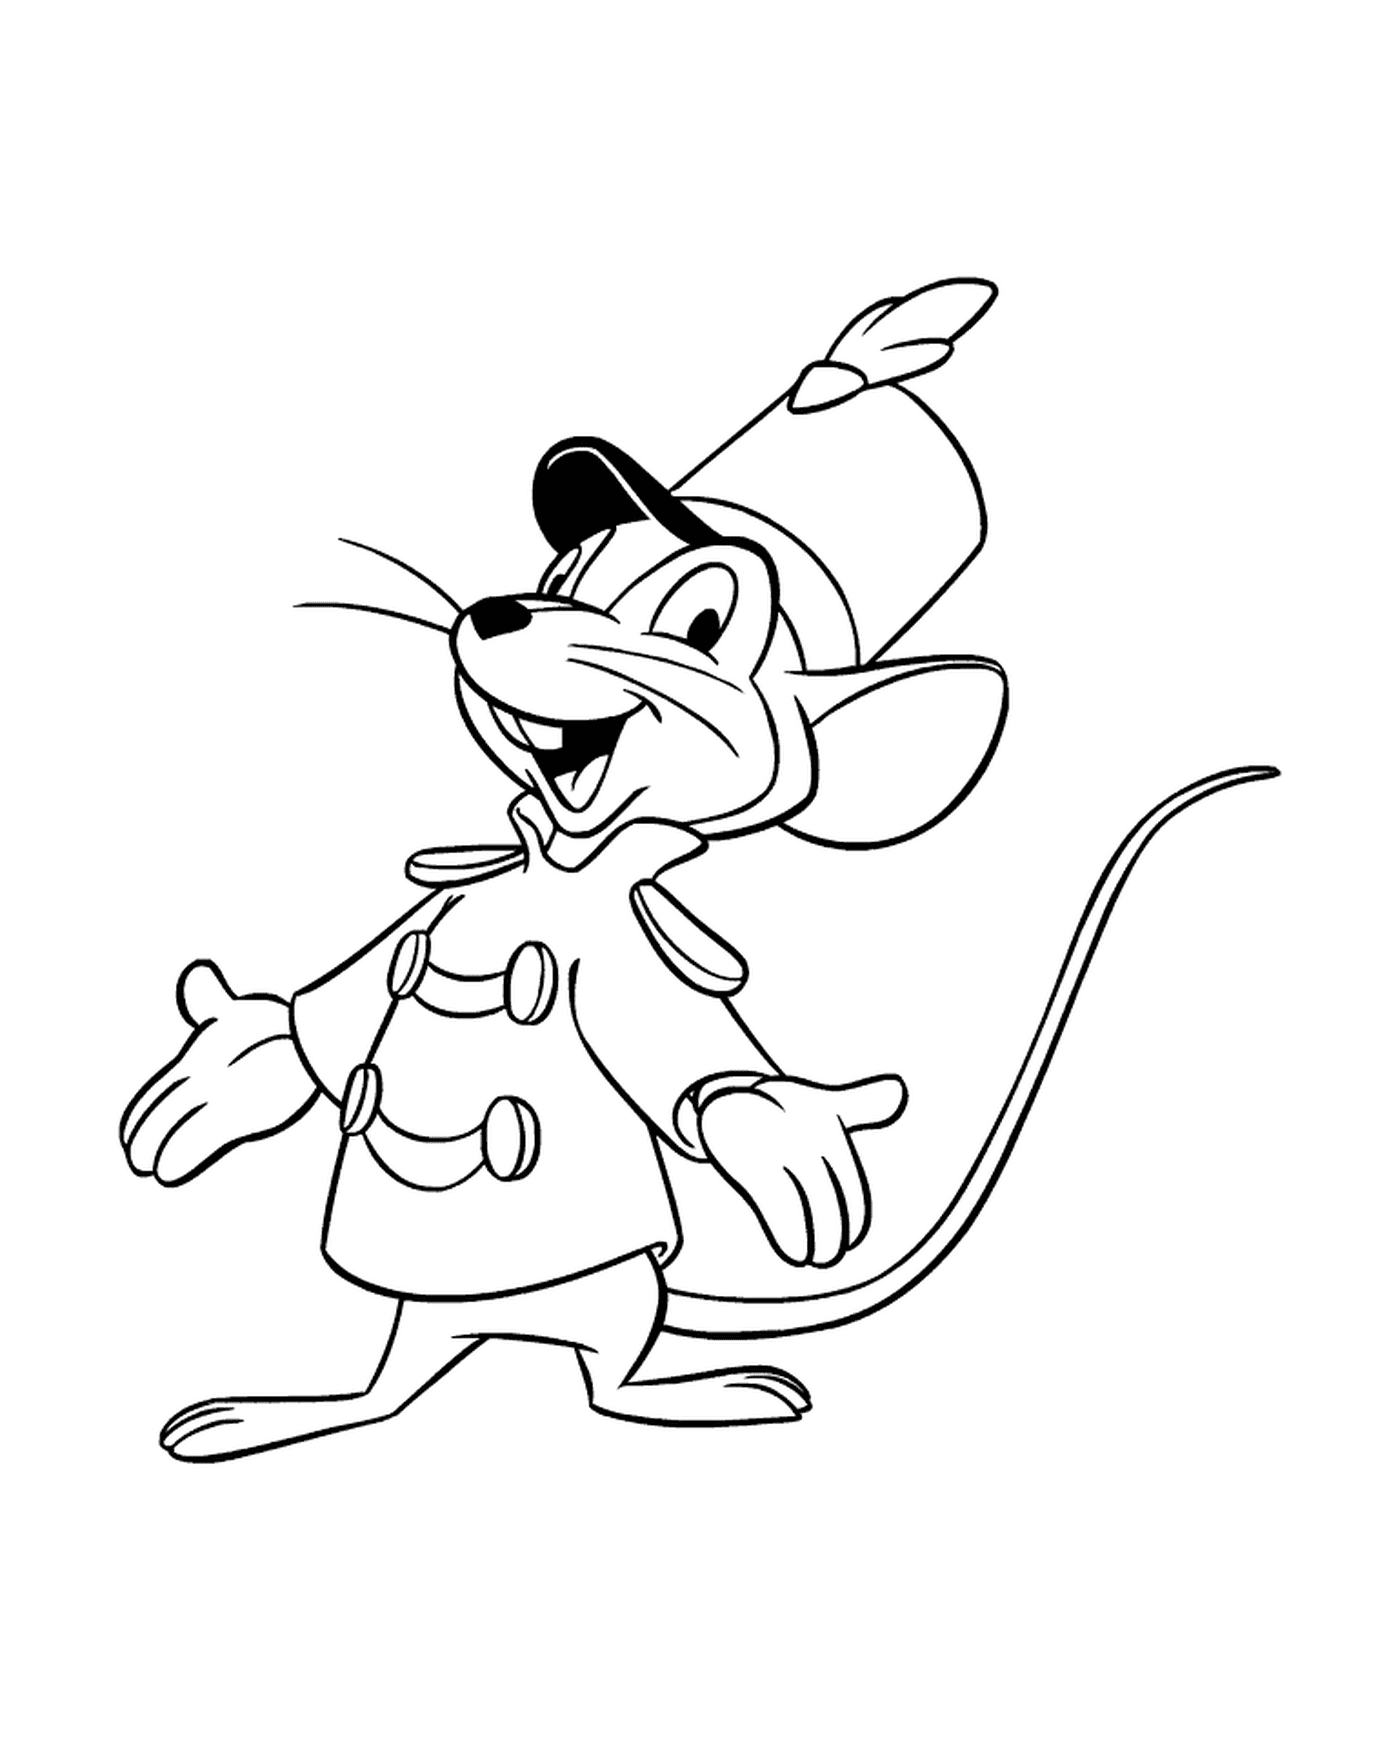  A mouse dressed in a coat and a hat 